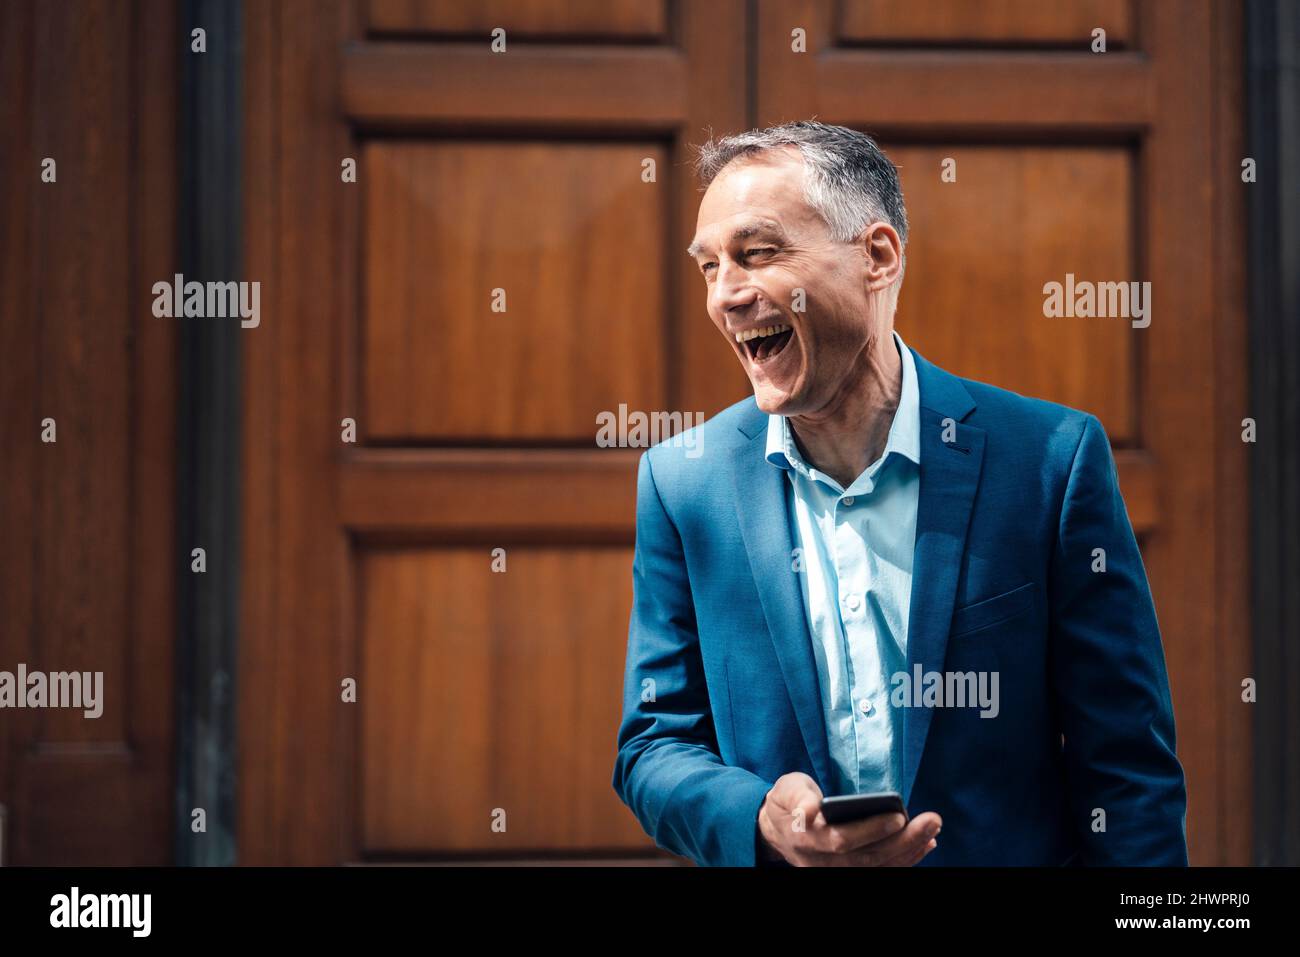 Businessman with smart phone laughing in front of closed door Stock Photo